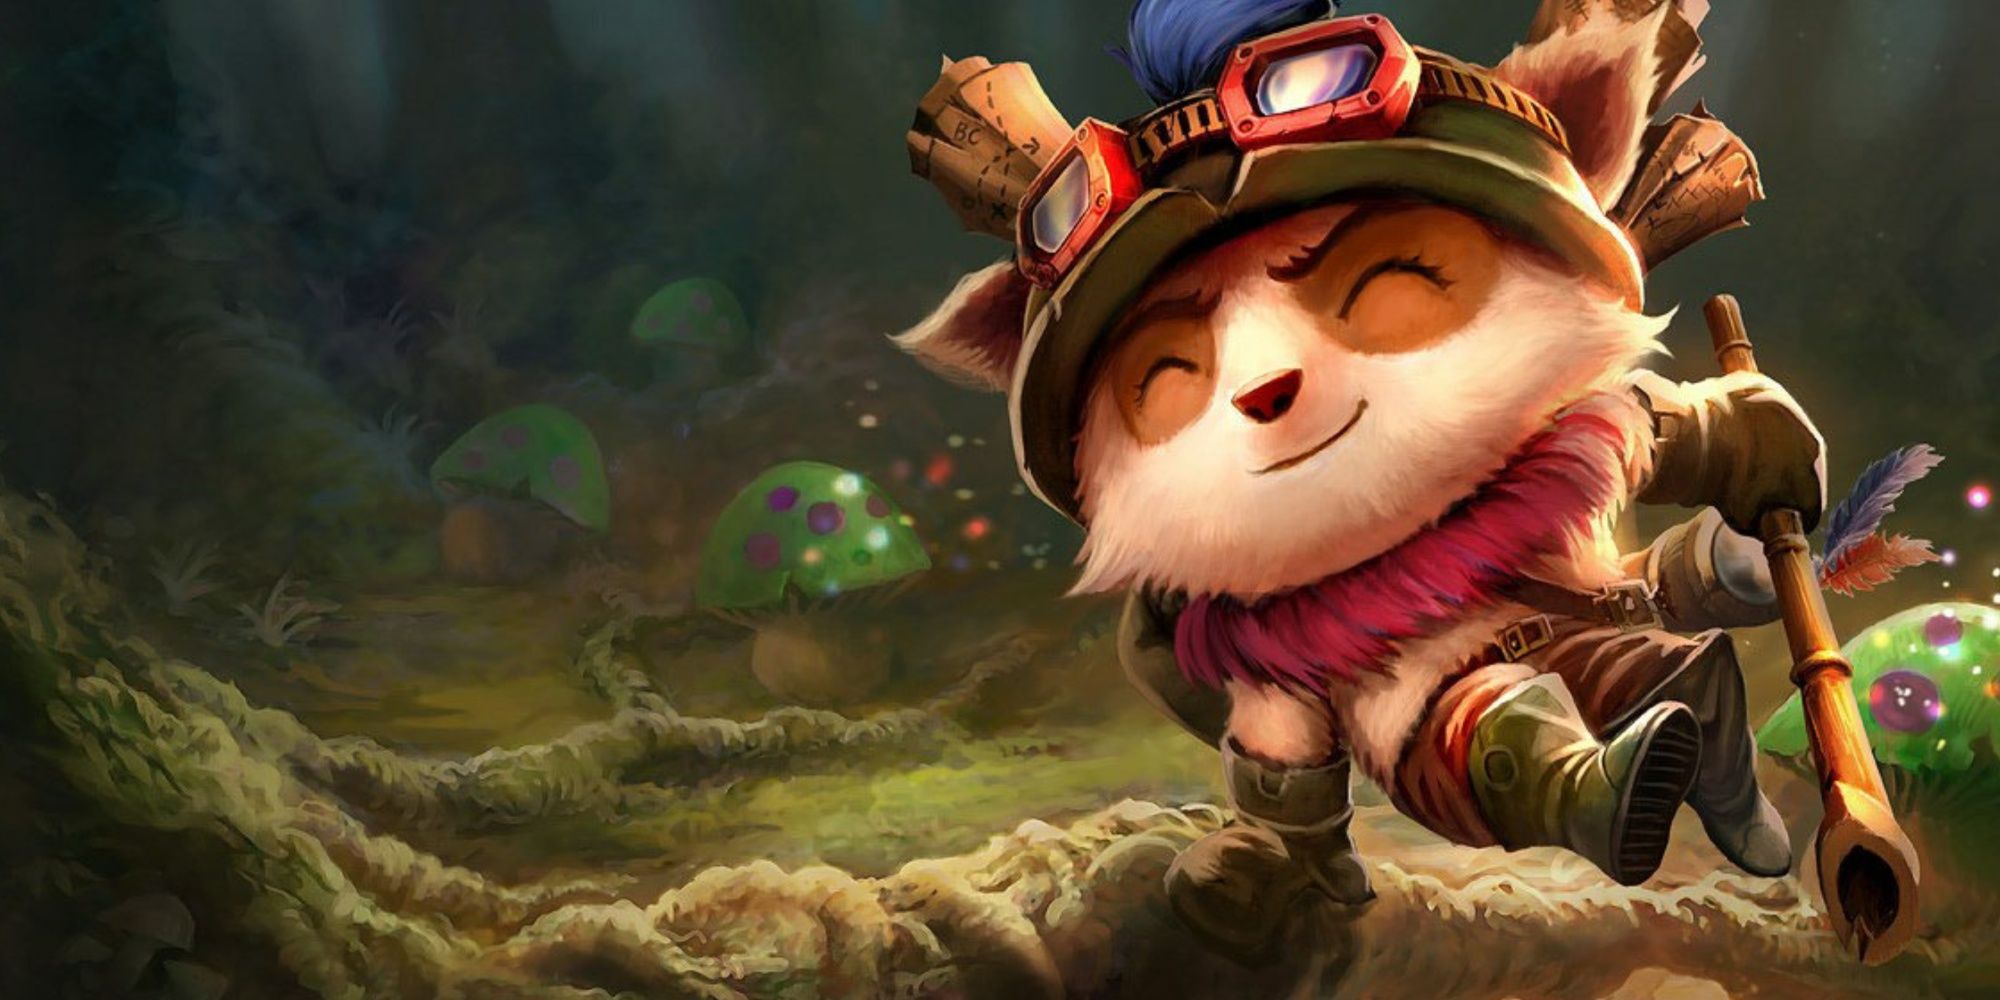 Teemo holding a Blowgun in Dungeons and Dragons